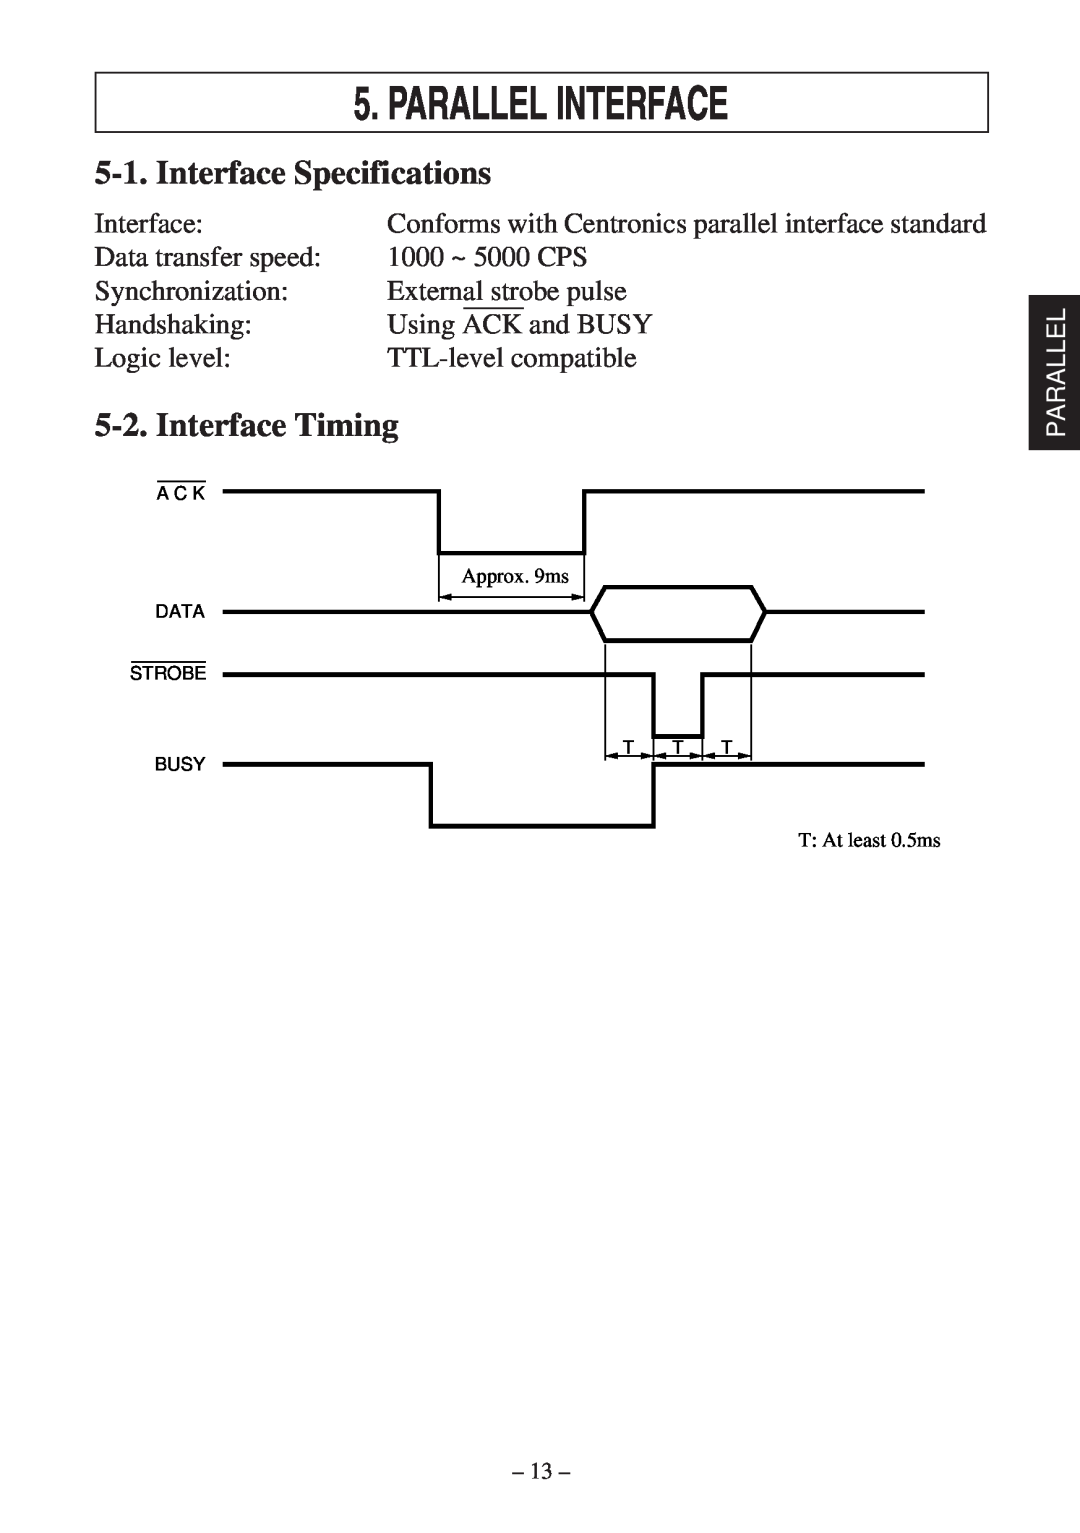 Star Micronics RS232 manual Parallel Interface, Interface Specifications, Interface Timing 